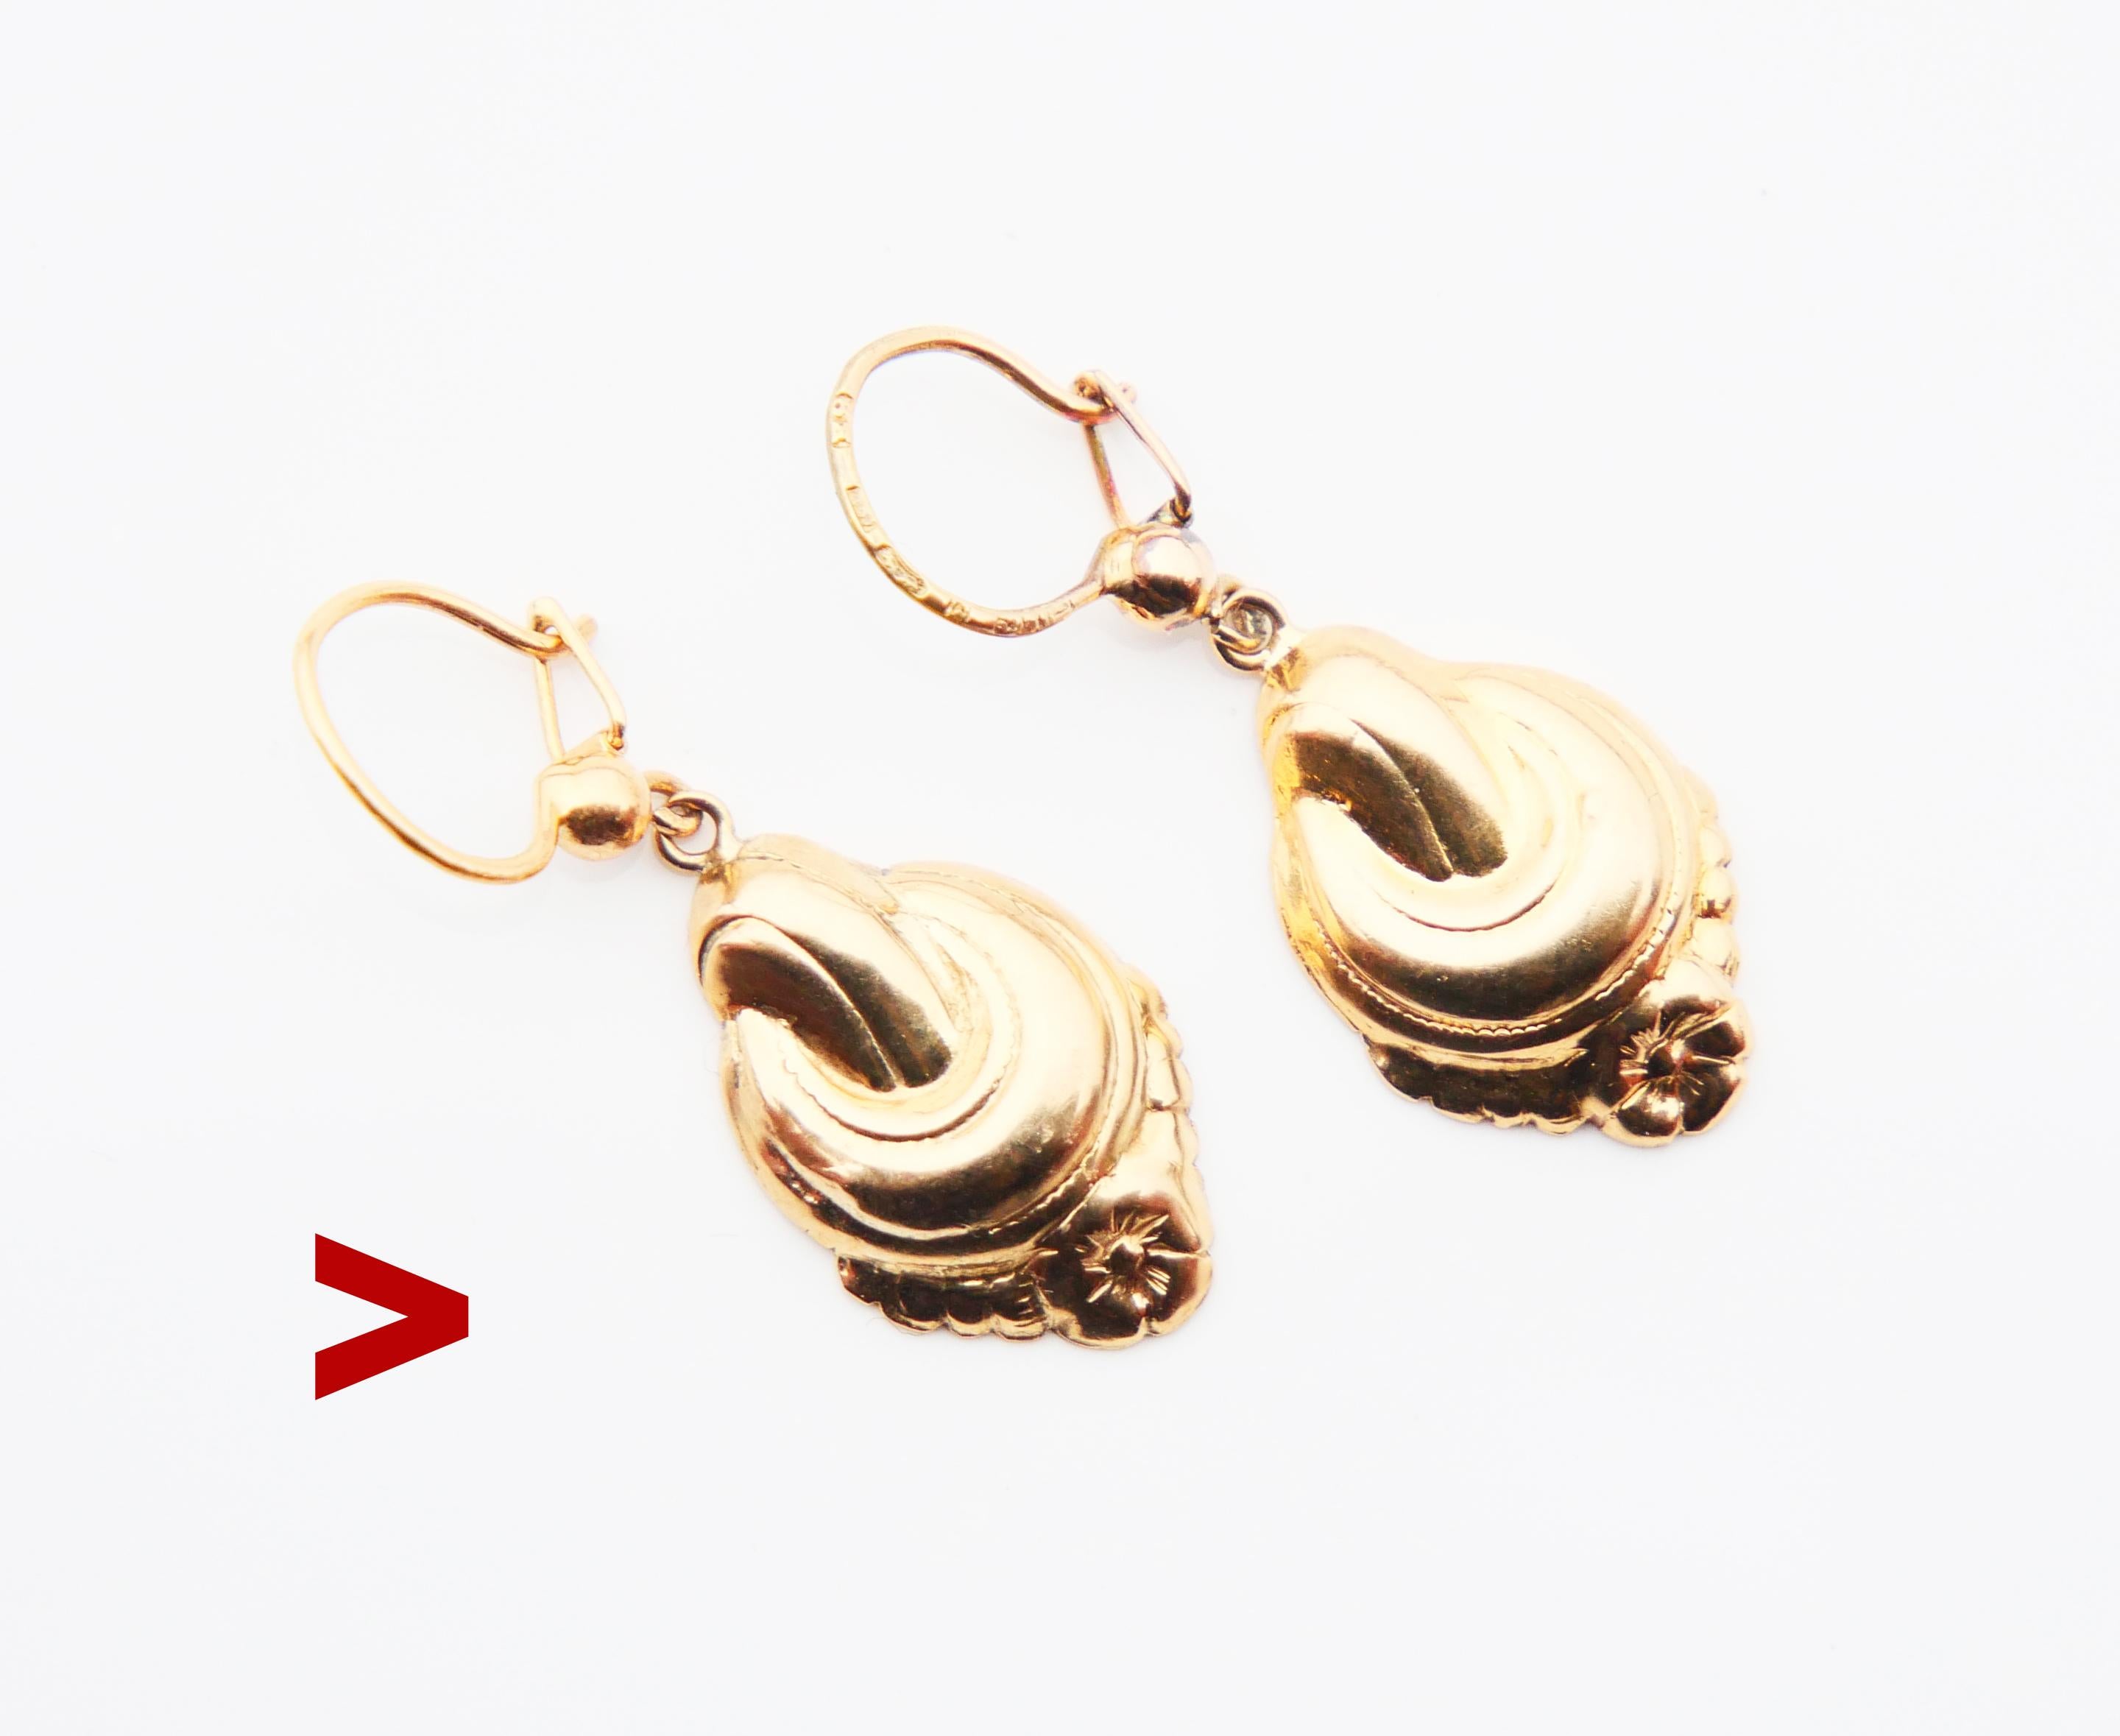 A pair of pendants dangles in solid 18K Yellow Gold with cast identical floral ornaments on front sides and flat backs.

Hooks can be later mod, hallmarked 18K, Swedish maker's hallmarks,year combo E8 / made in 1955. Pendants may well be older